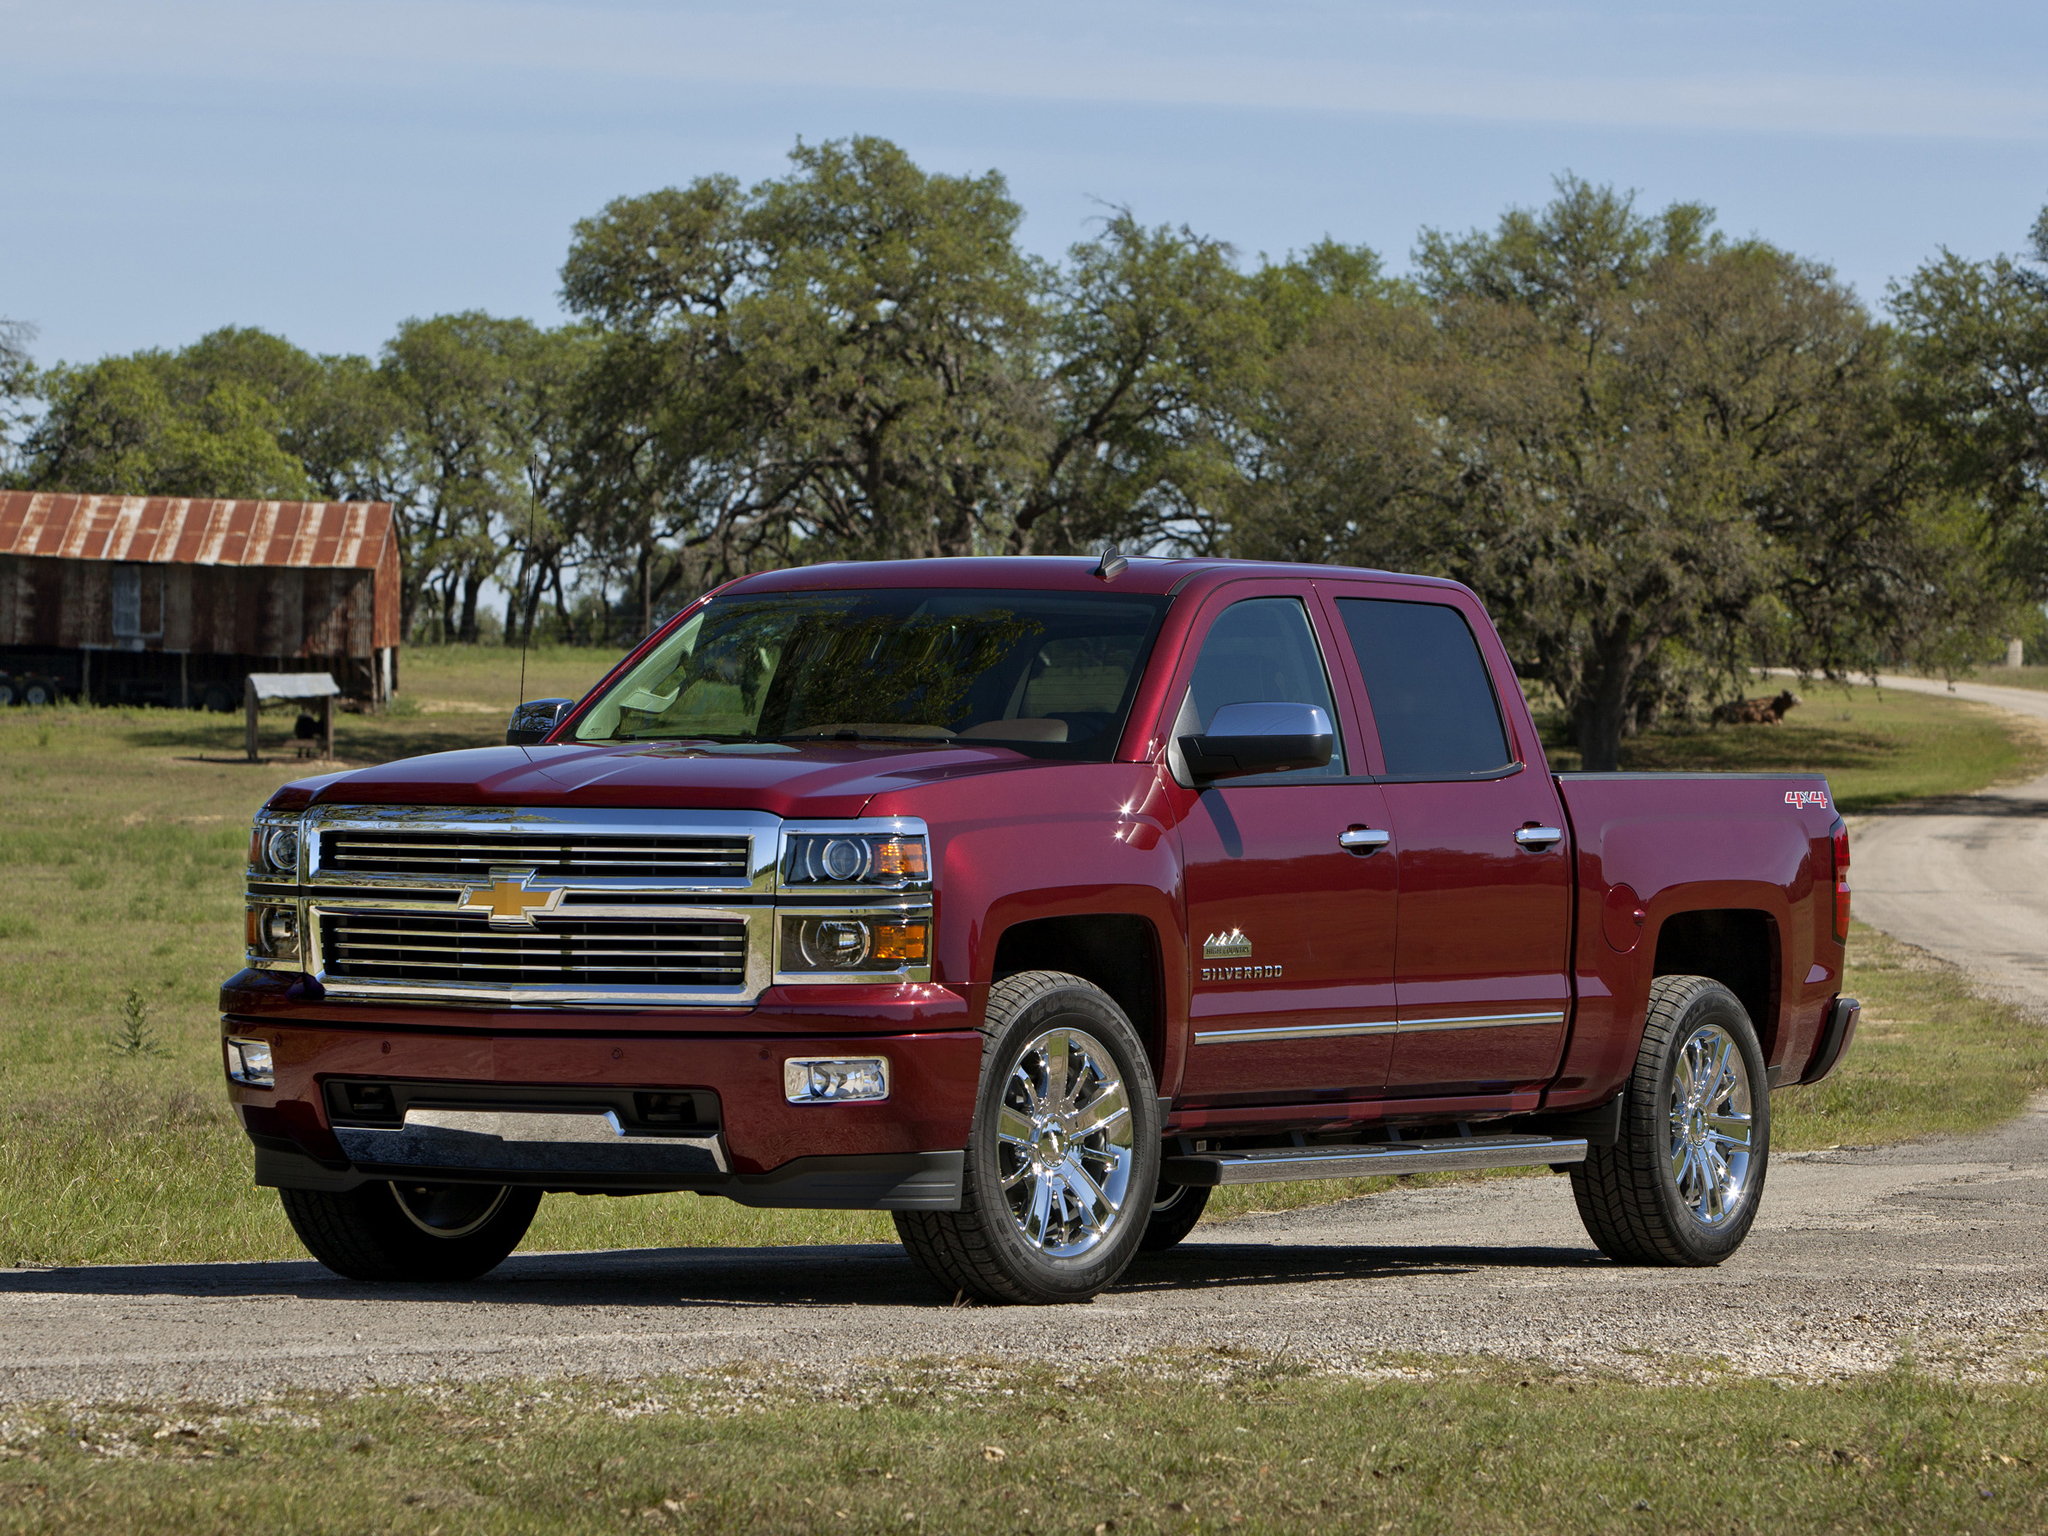 Vehicles 2013 Chevrolet Silverado High Country Crew Cab HD Wallpaper | Background Image